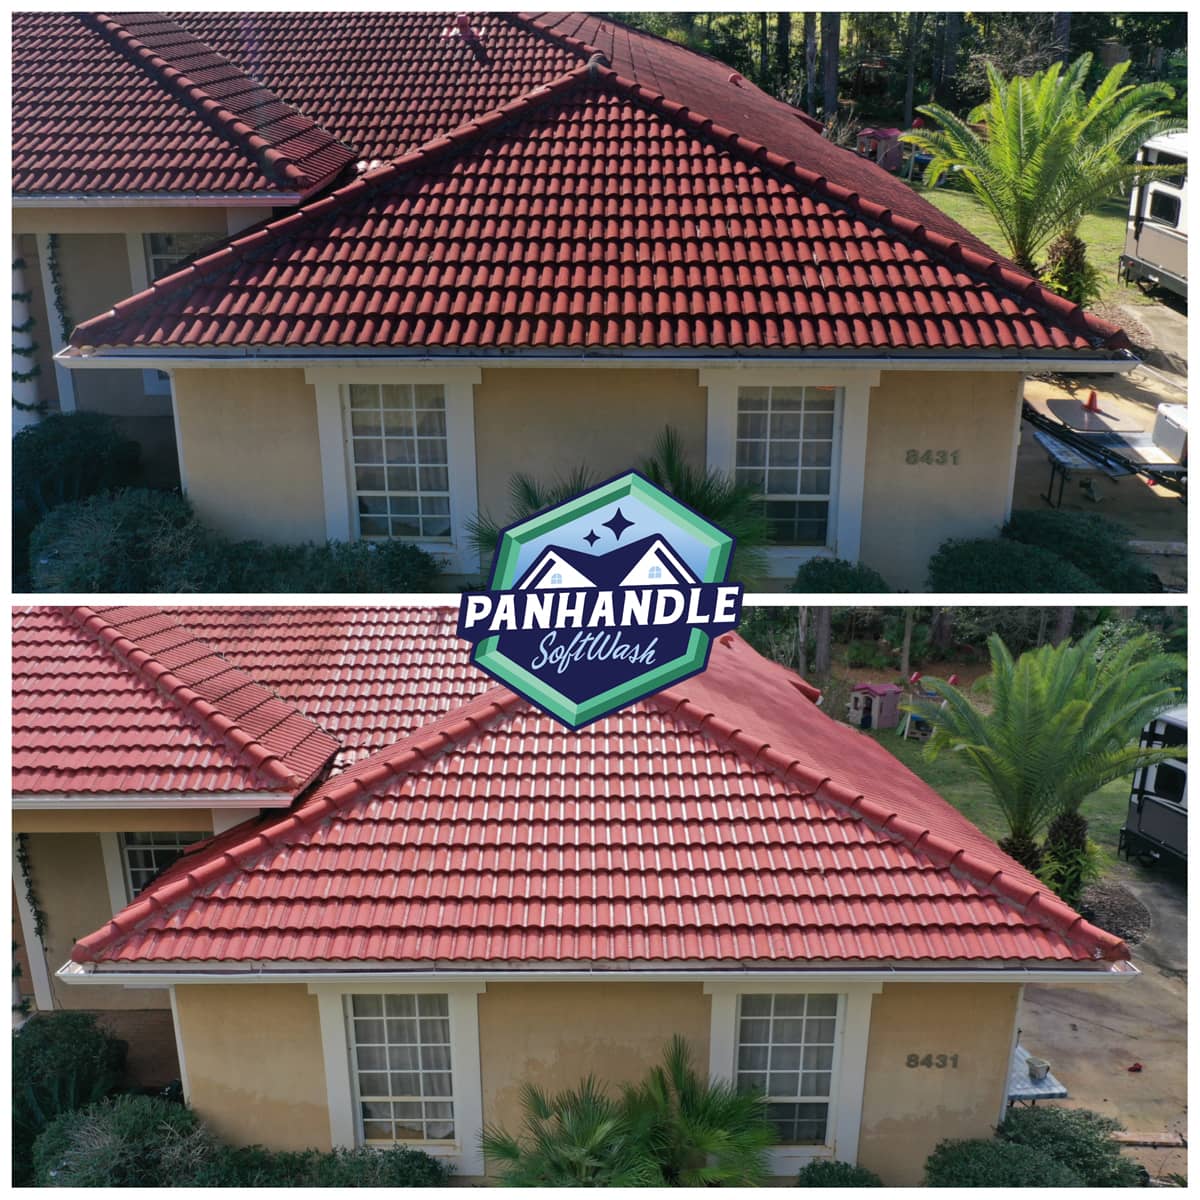 residential home with red roof before and after cleaning